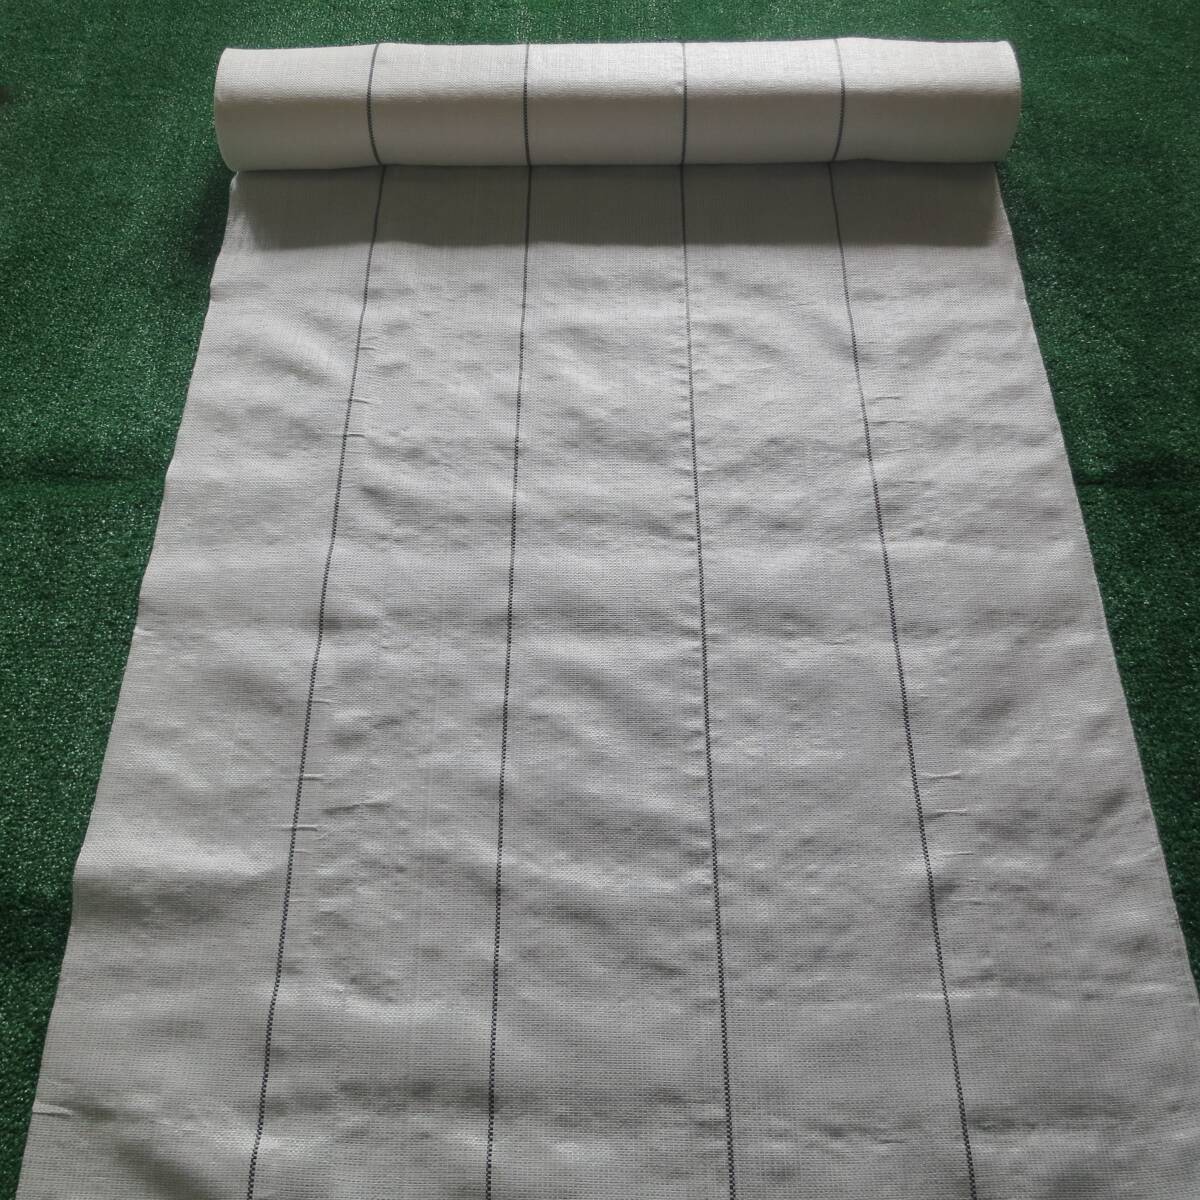  weed proofing seat 2m×10m white color 1 pcs 